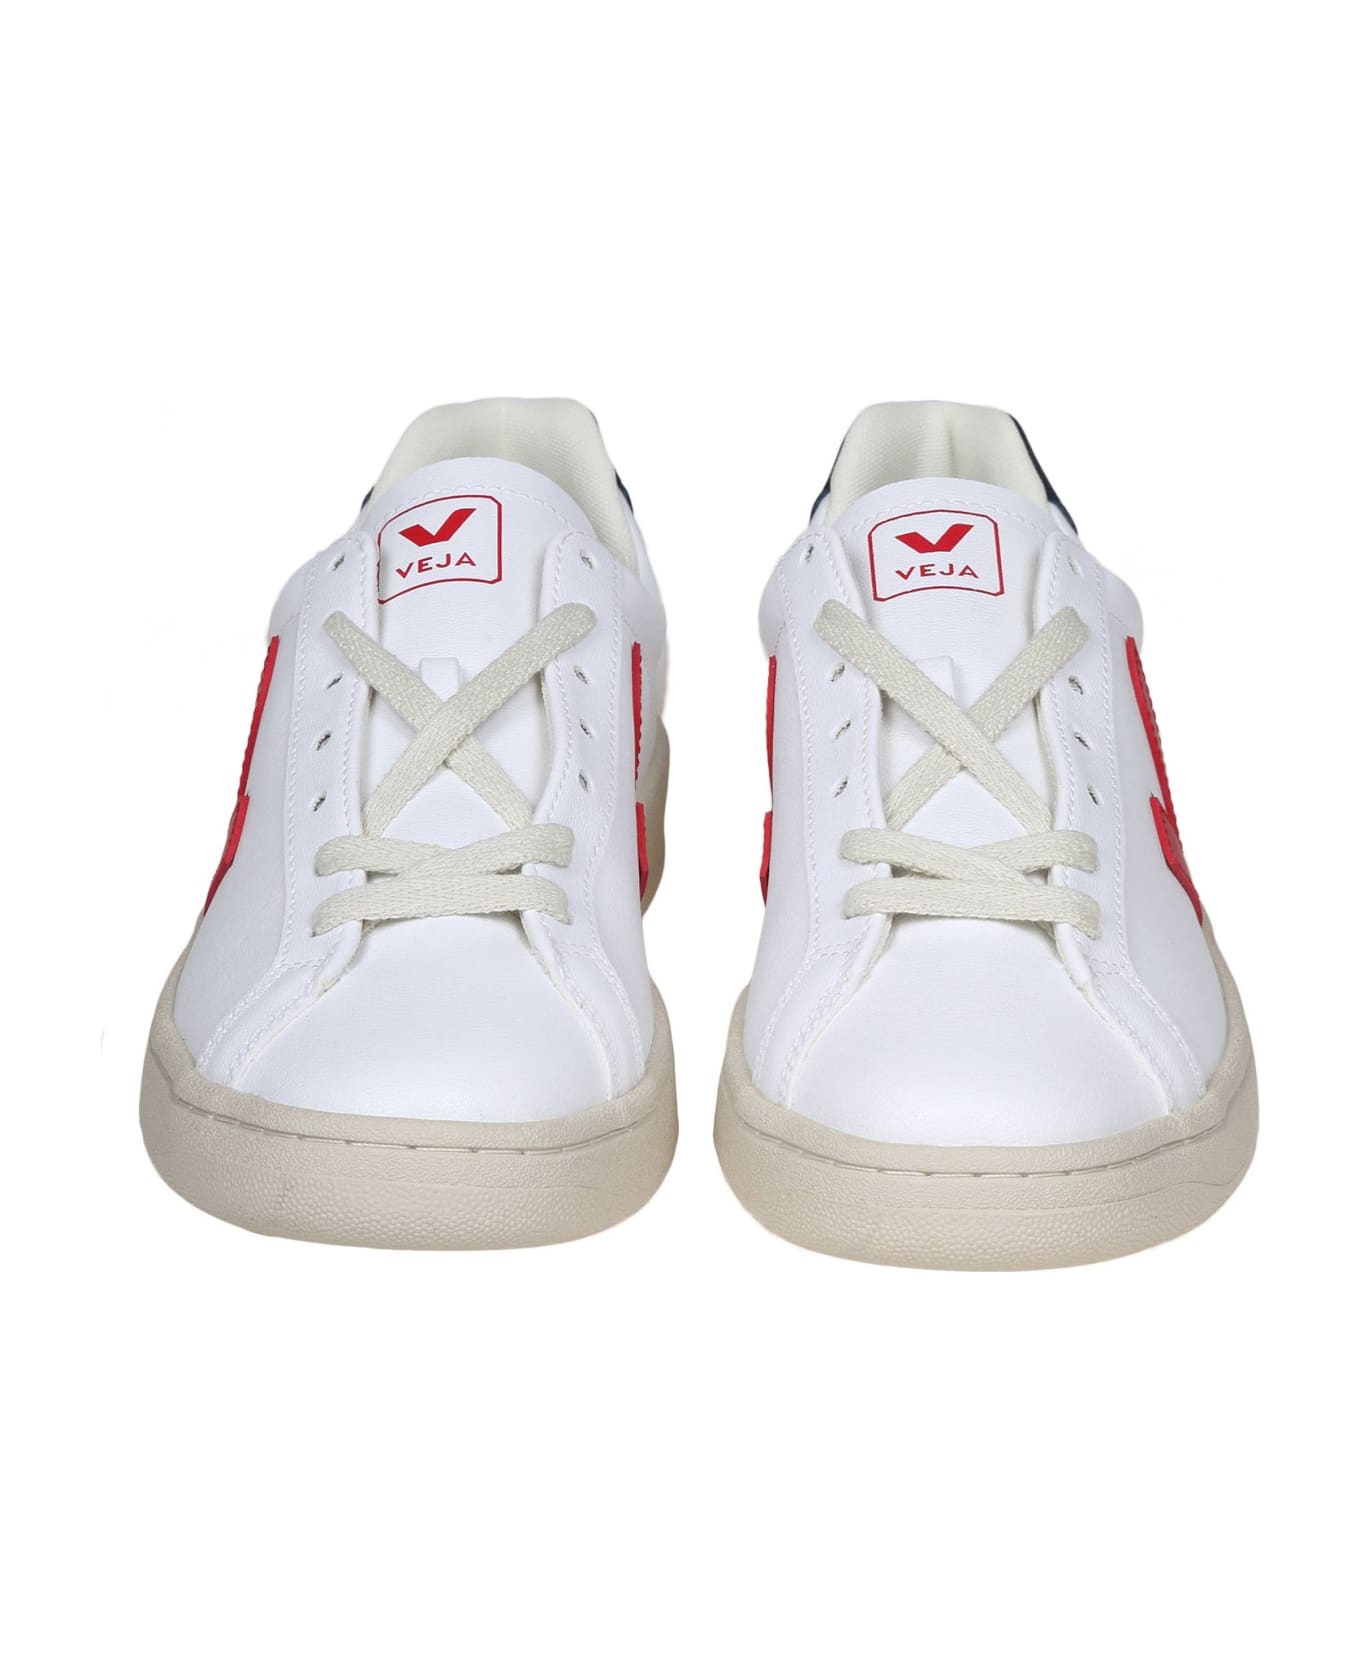 Veja Campo Chromefree In White/red Leather - White/red スニーカー